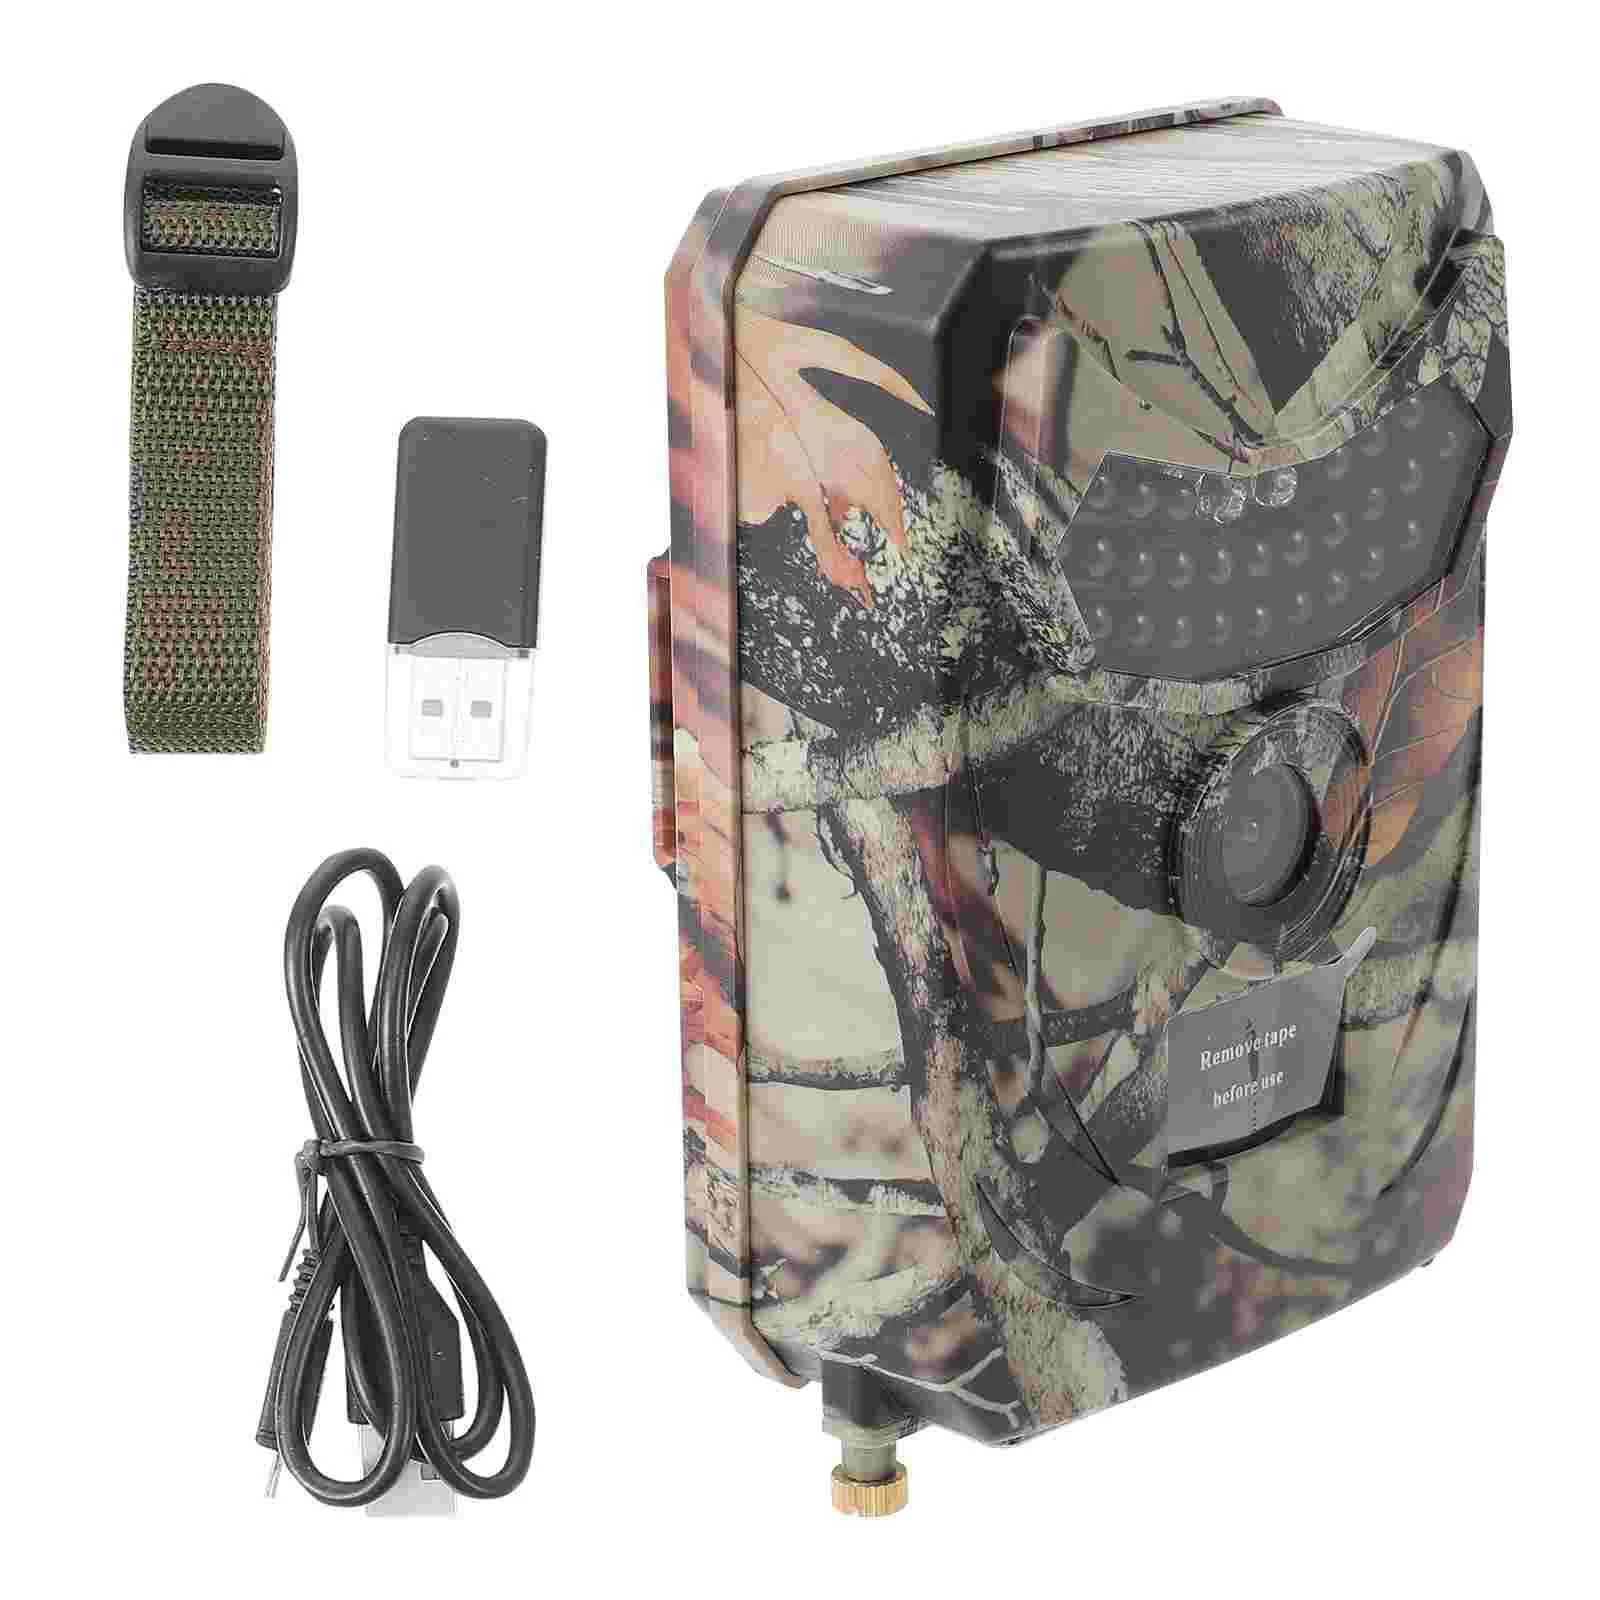 

1080 P Camera Outdoor Hunting Night Vision Water Proof Waterproof Scouting Trail Caza